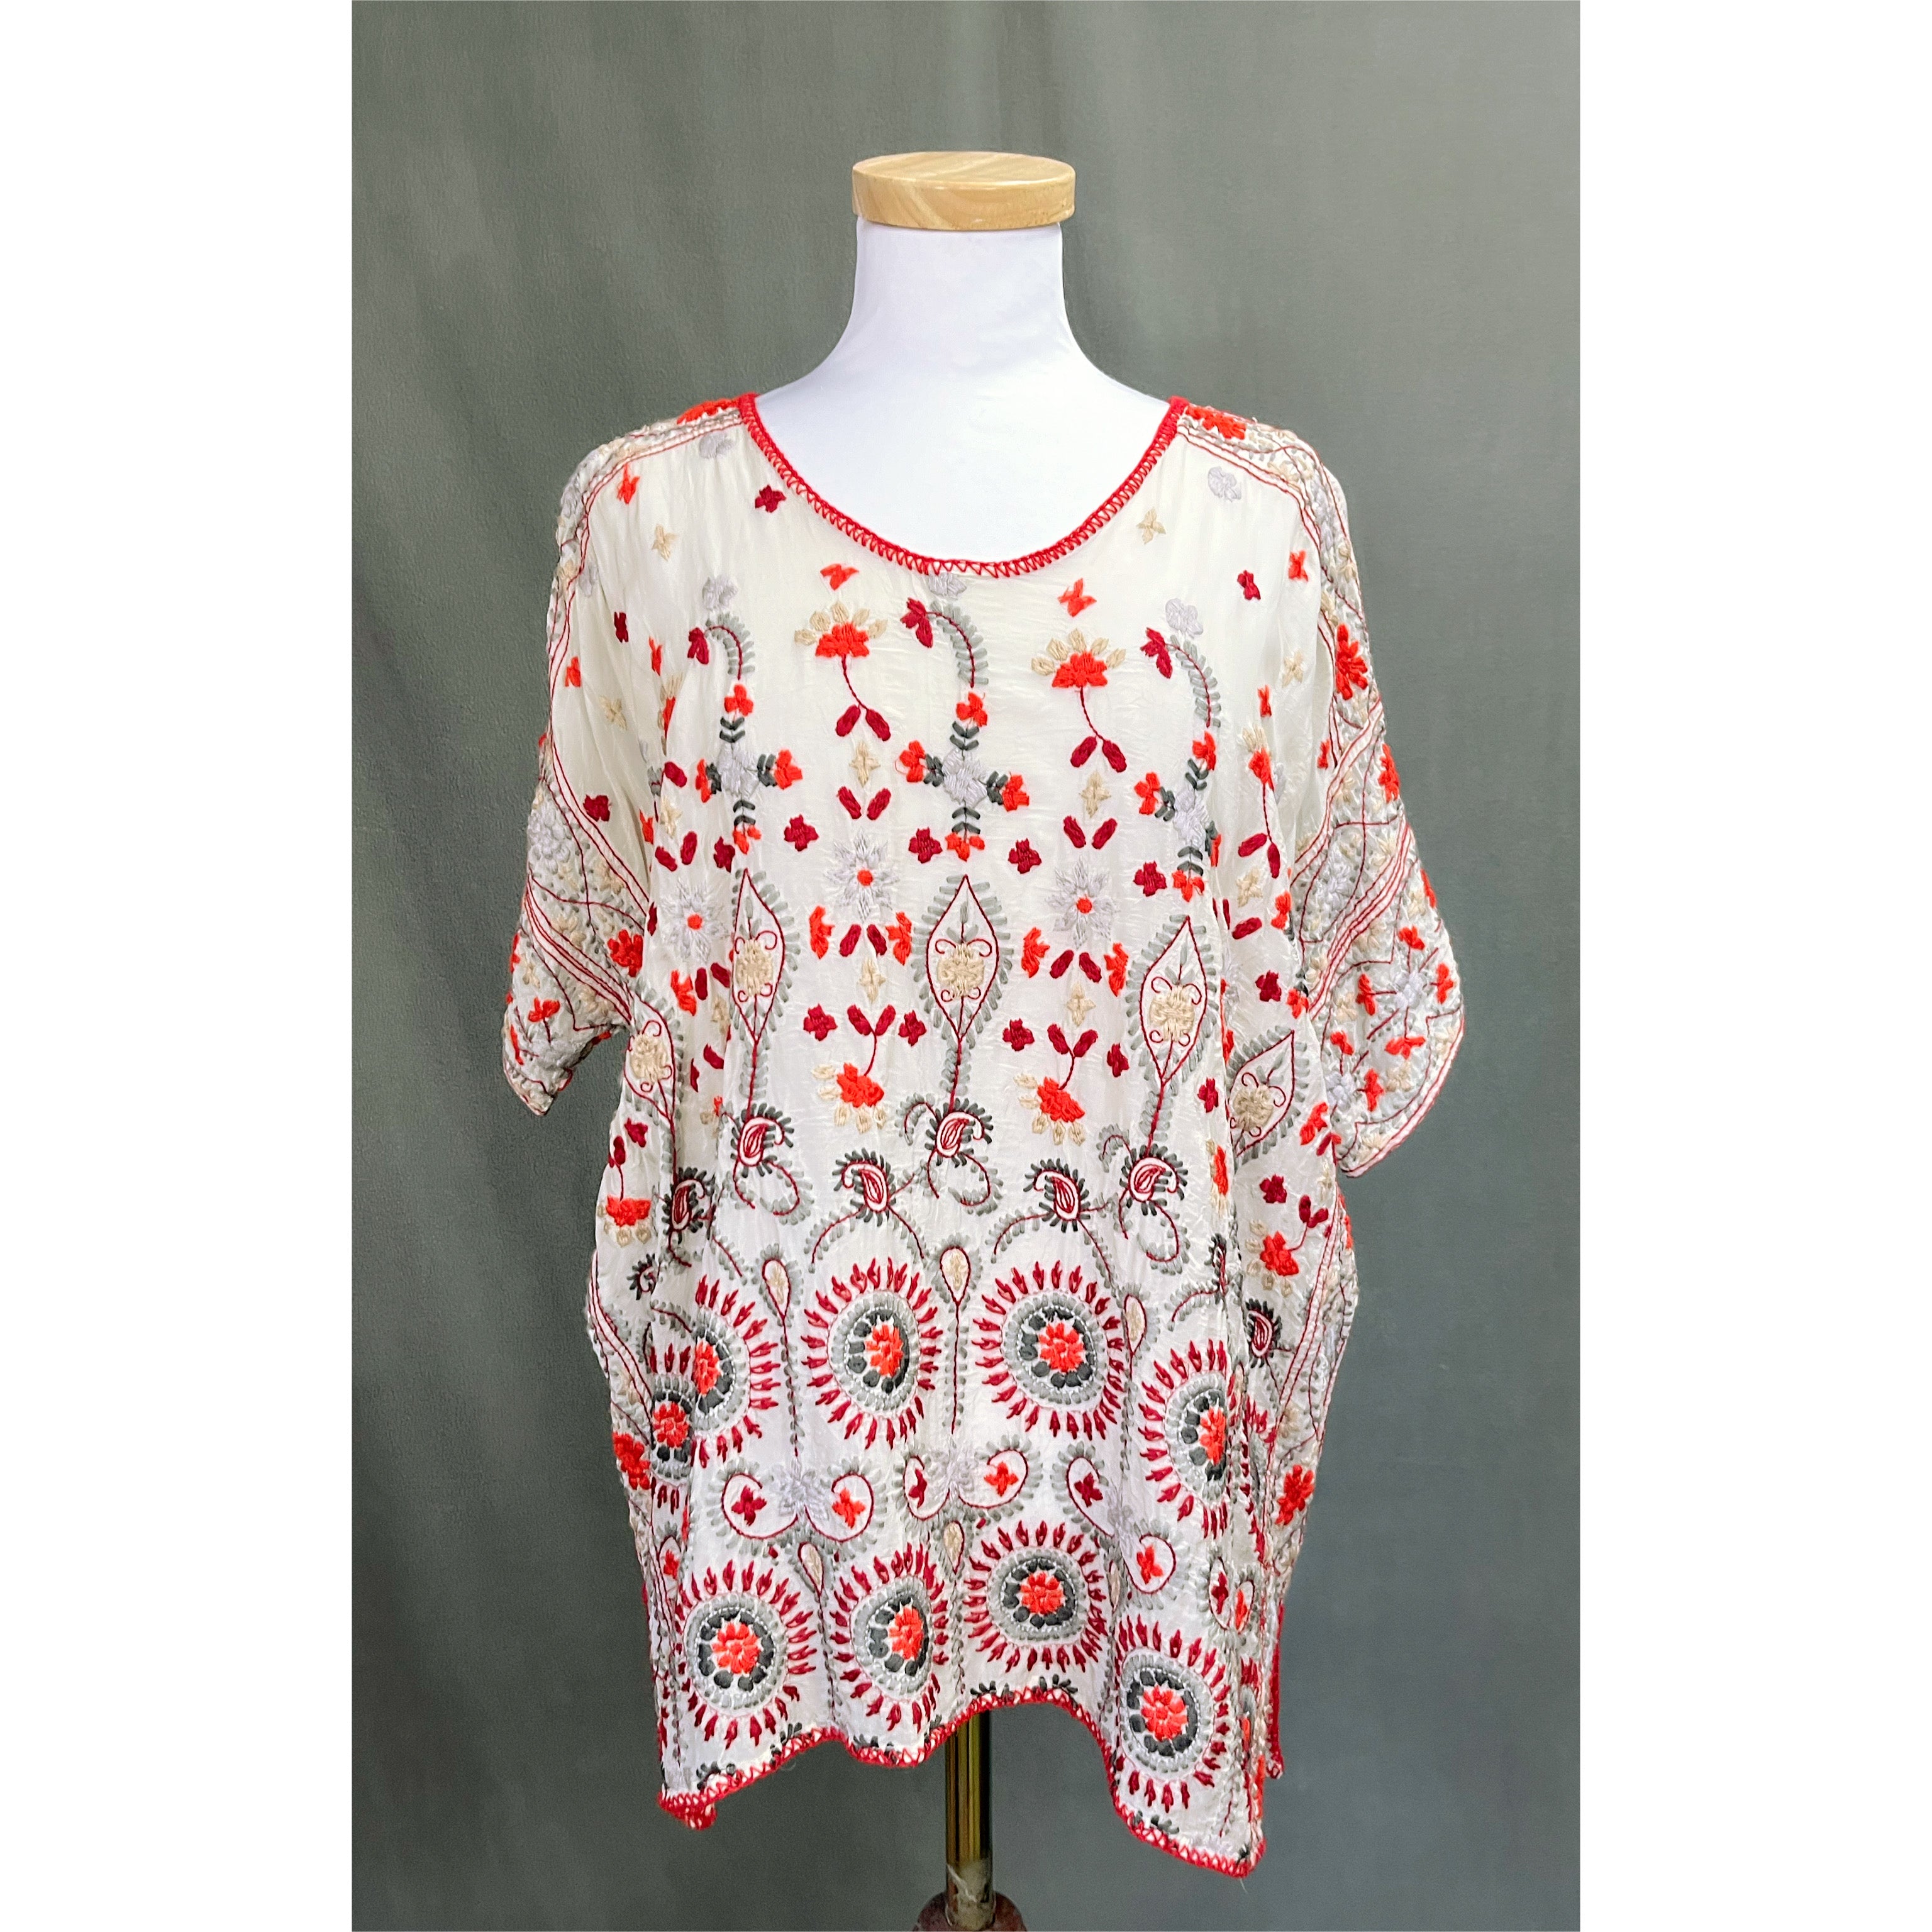 Johnny Was cream, red, and gray Melia blouse, size S